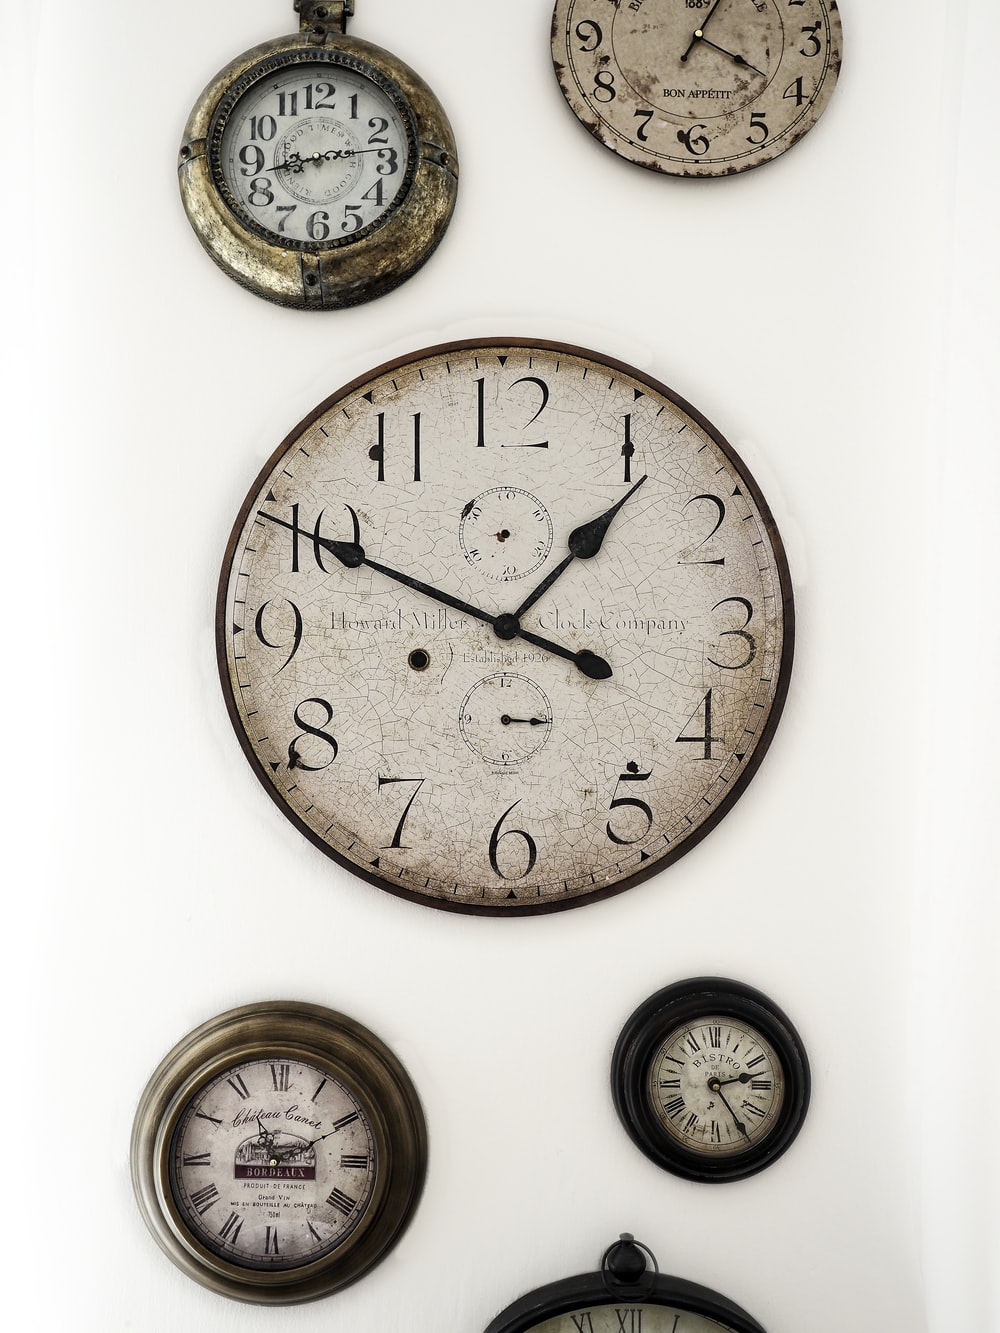 Antique Clock Face Wallpapers